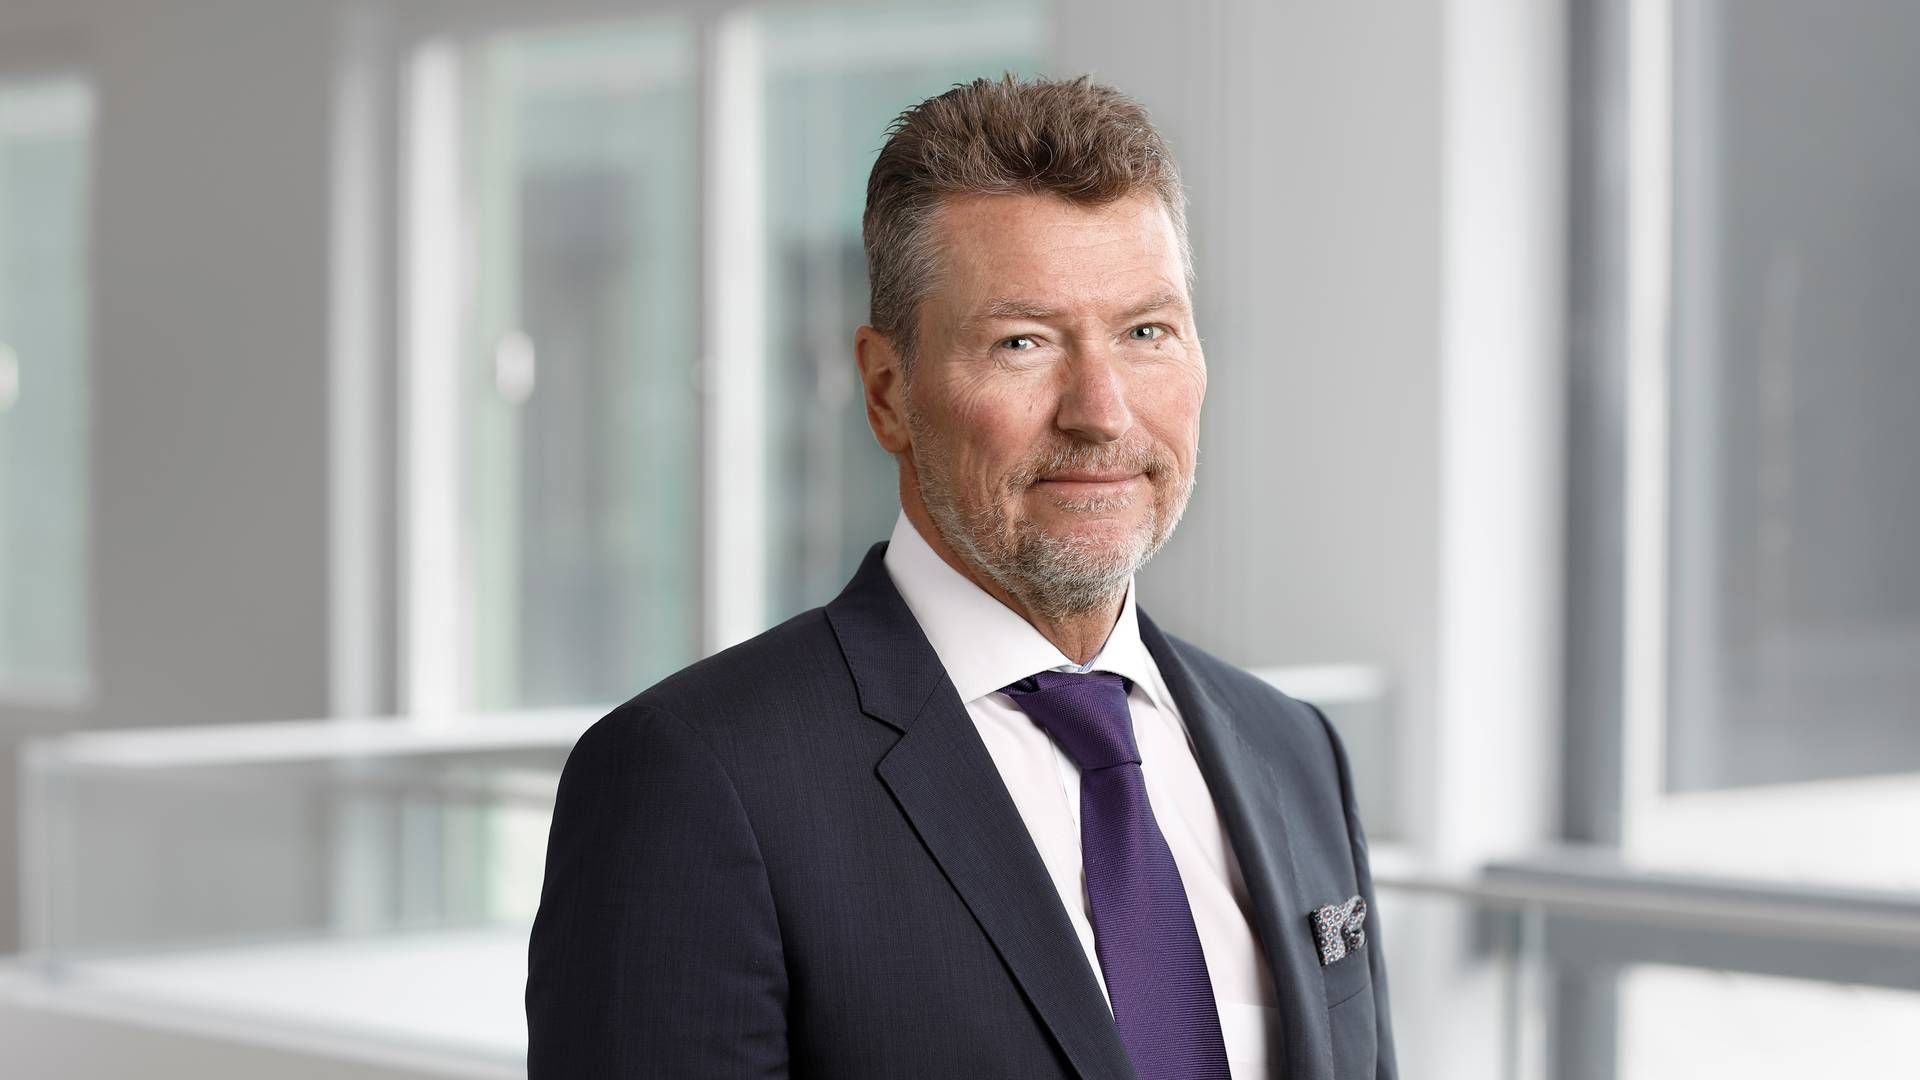 Torbjörn Wahlborg is leaving after almost 35 years at Vattenfall. | Photo: Vattenfall